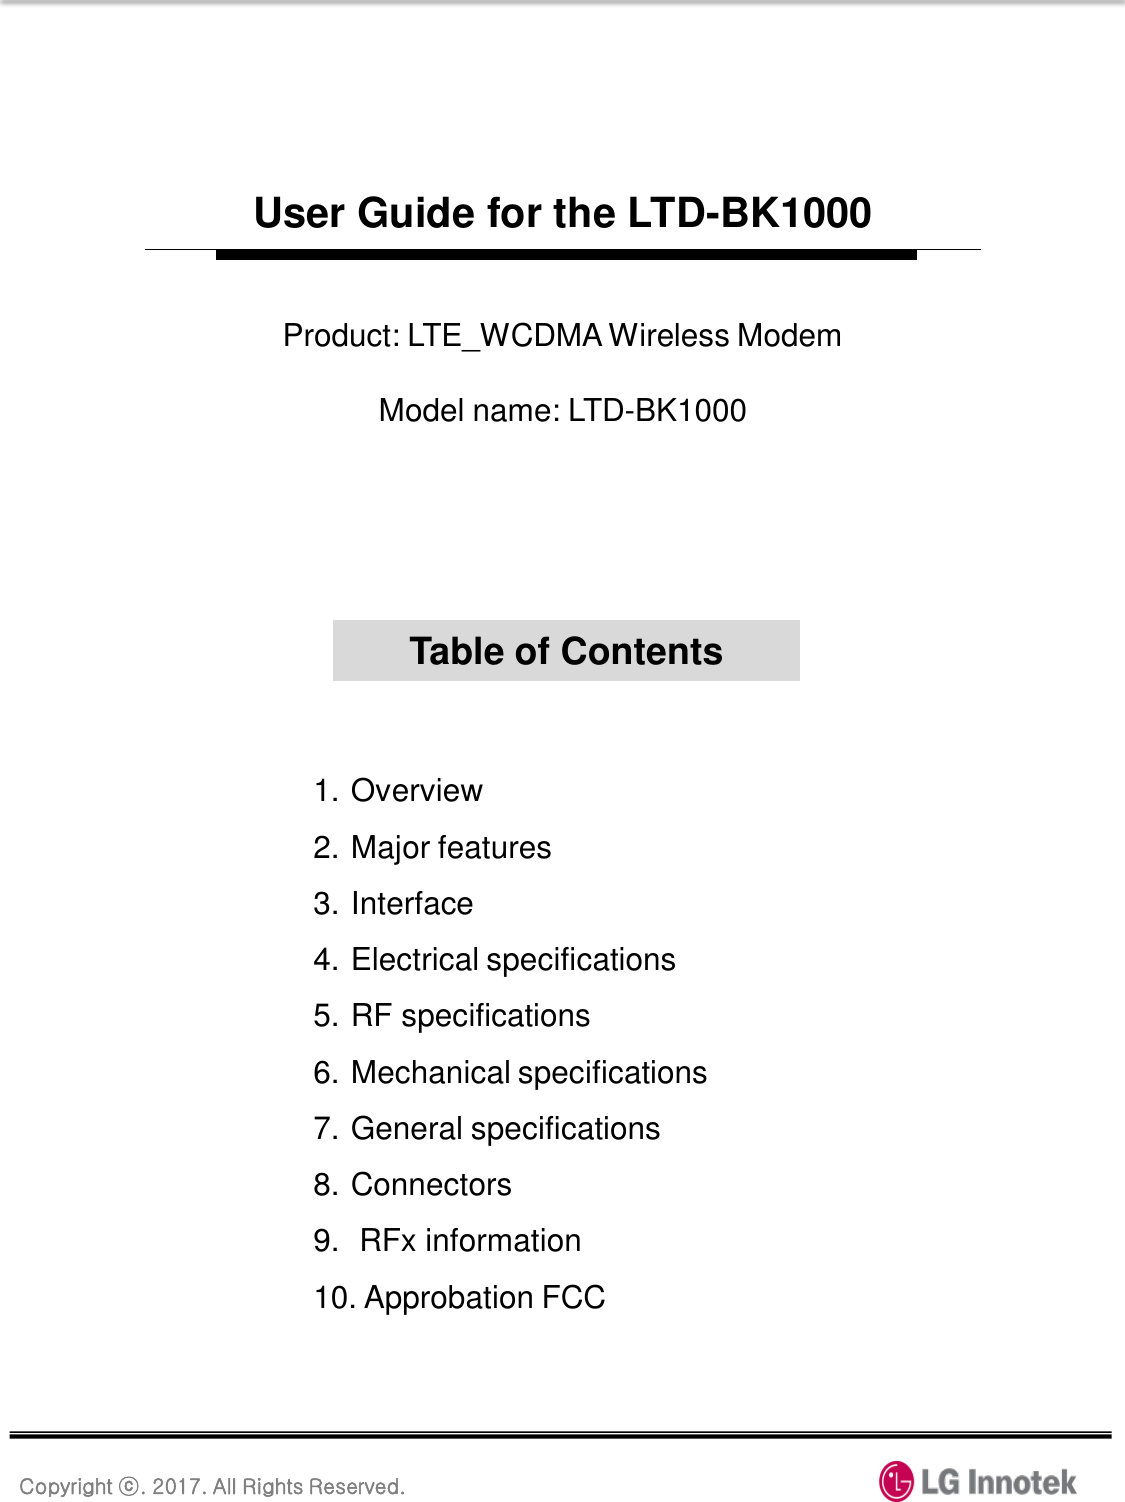 Copyright ⓒ. 2017. All Rights Reserved. User Guide for the LTD-BK1000 1. Overview 2. Major features 3. Interface 4. Electrical specifications 5. RF specifications 6. Mechanical specifications 7. General specifications 8. Connectors 9.  RFx information 10. Approbation FCC Table of Contents Product: LTE_WCDMA Wireless Modem  Model name: LTD-BK1000 